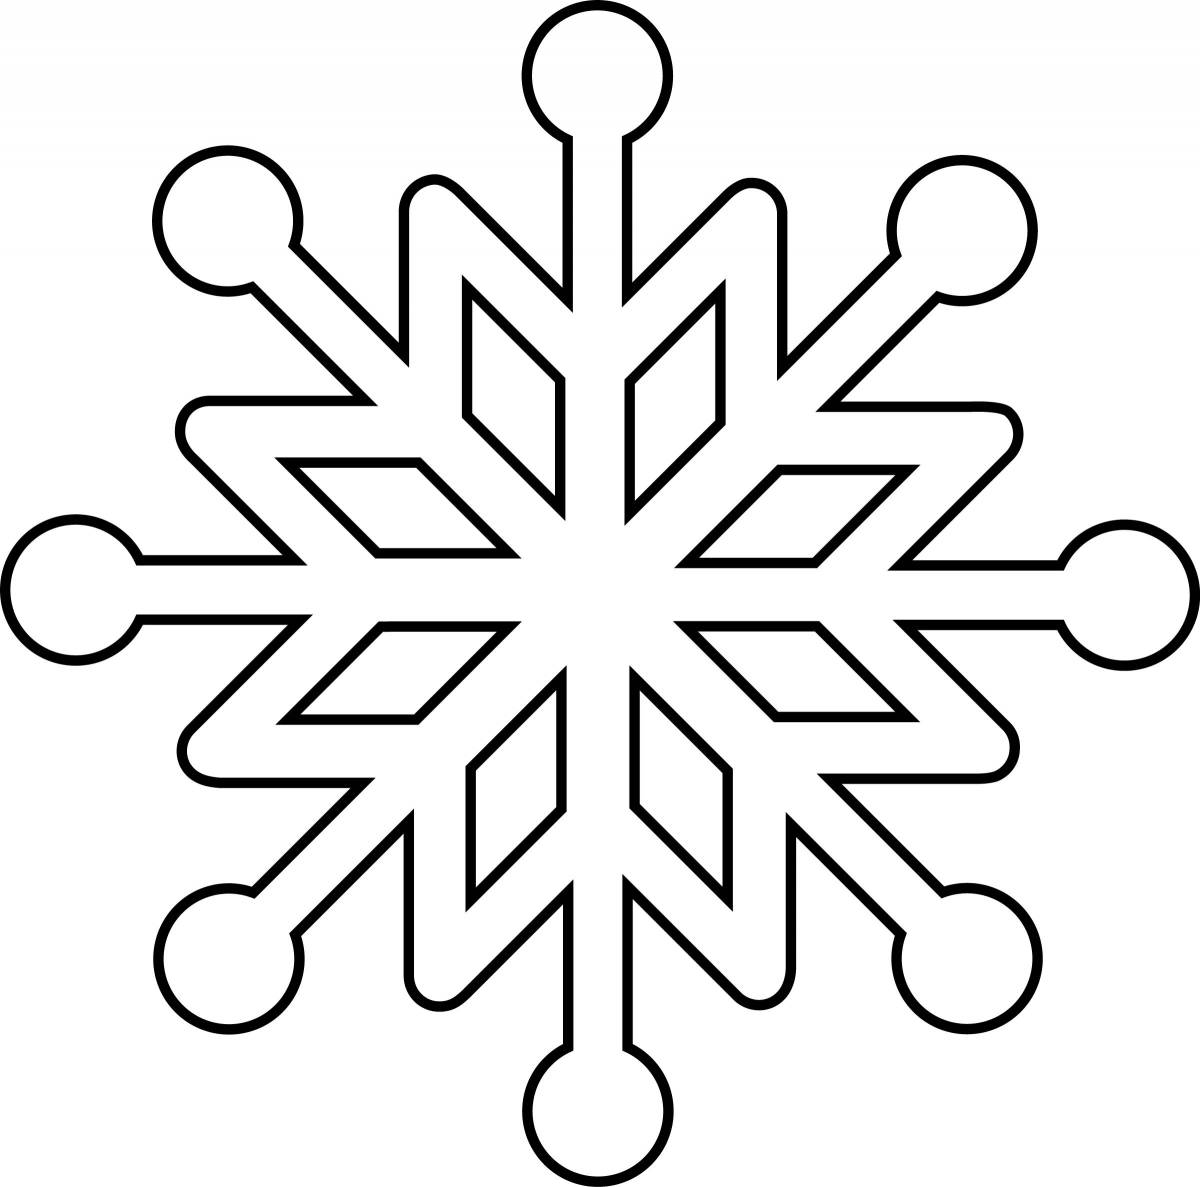 Coloring book dreamy drawing of a snowflake